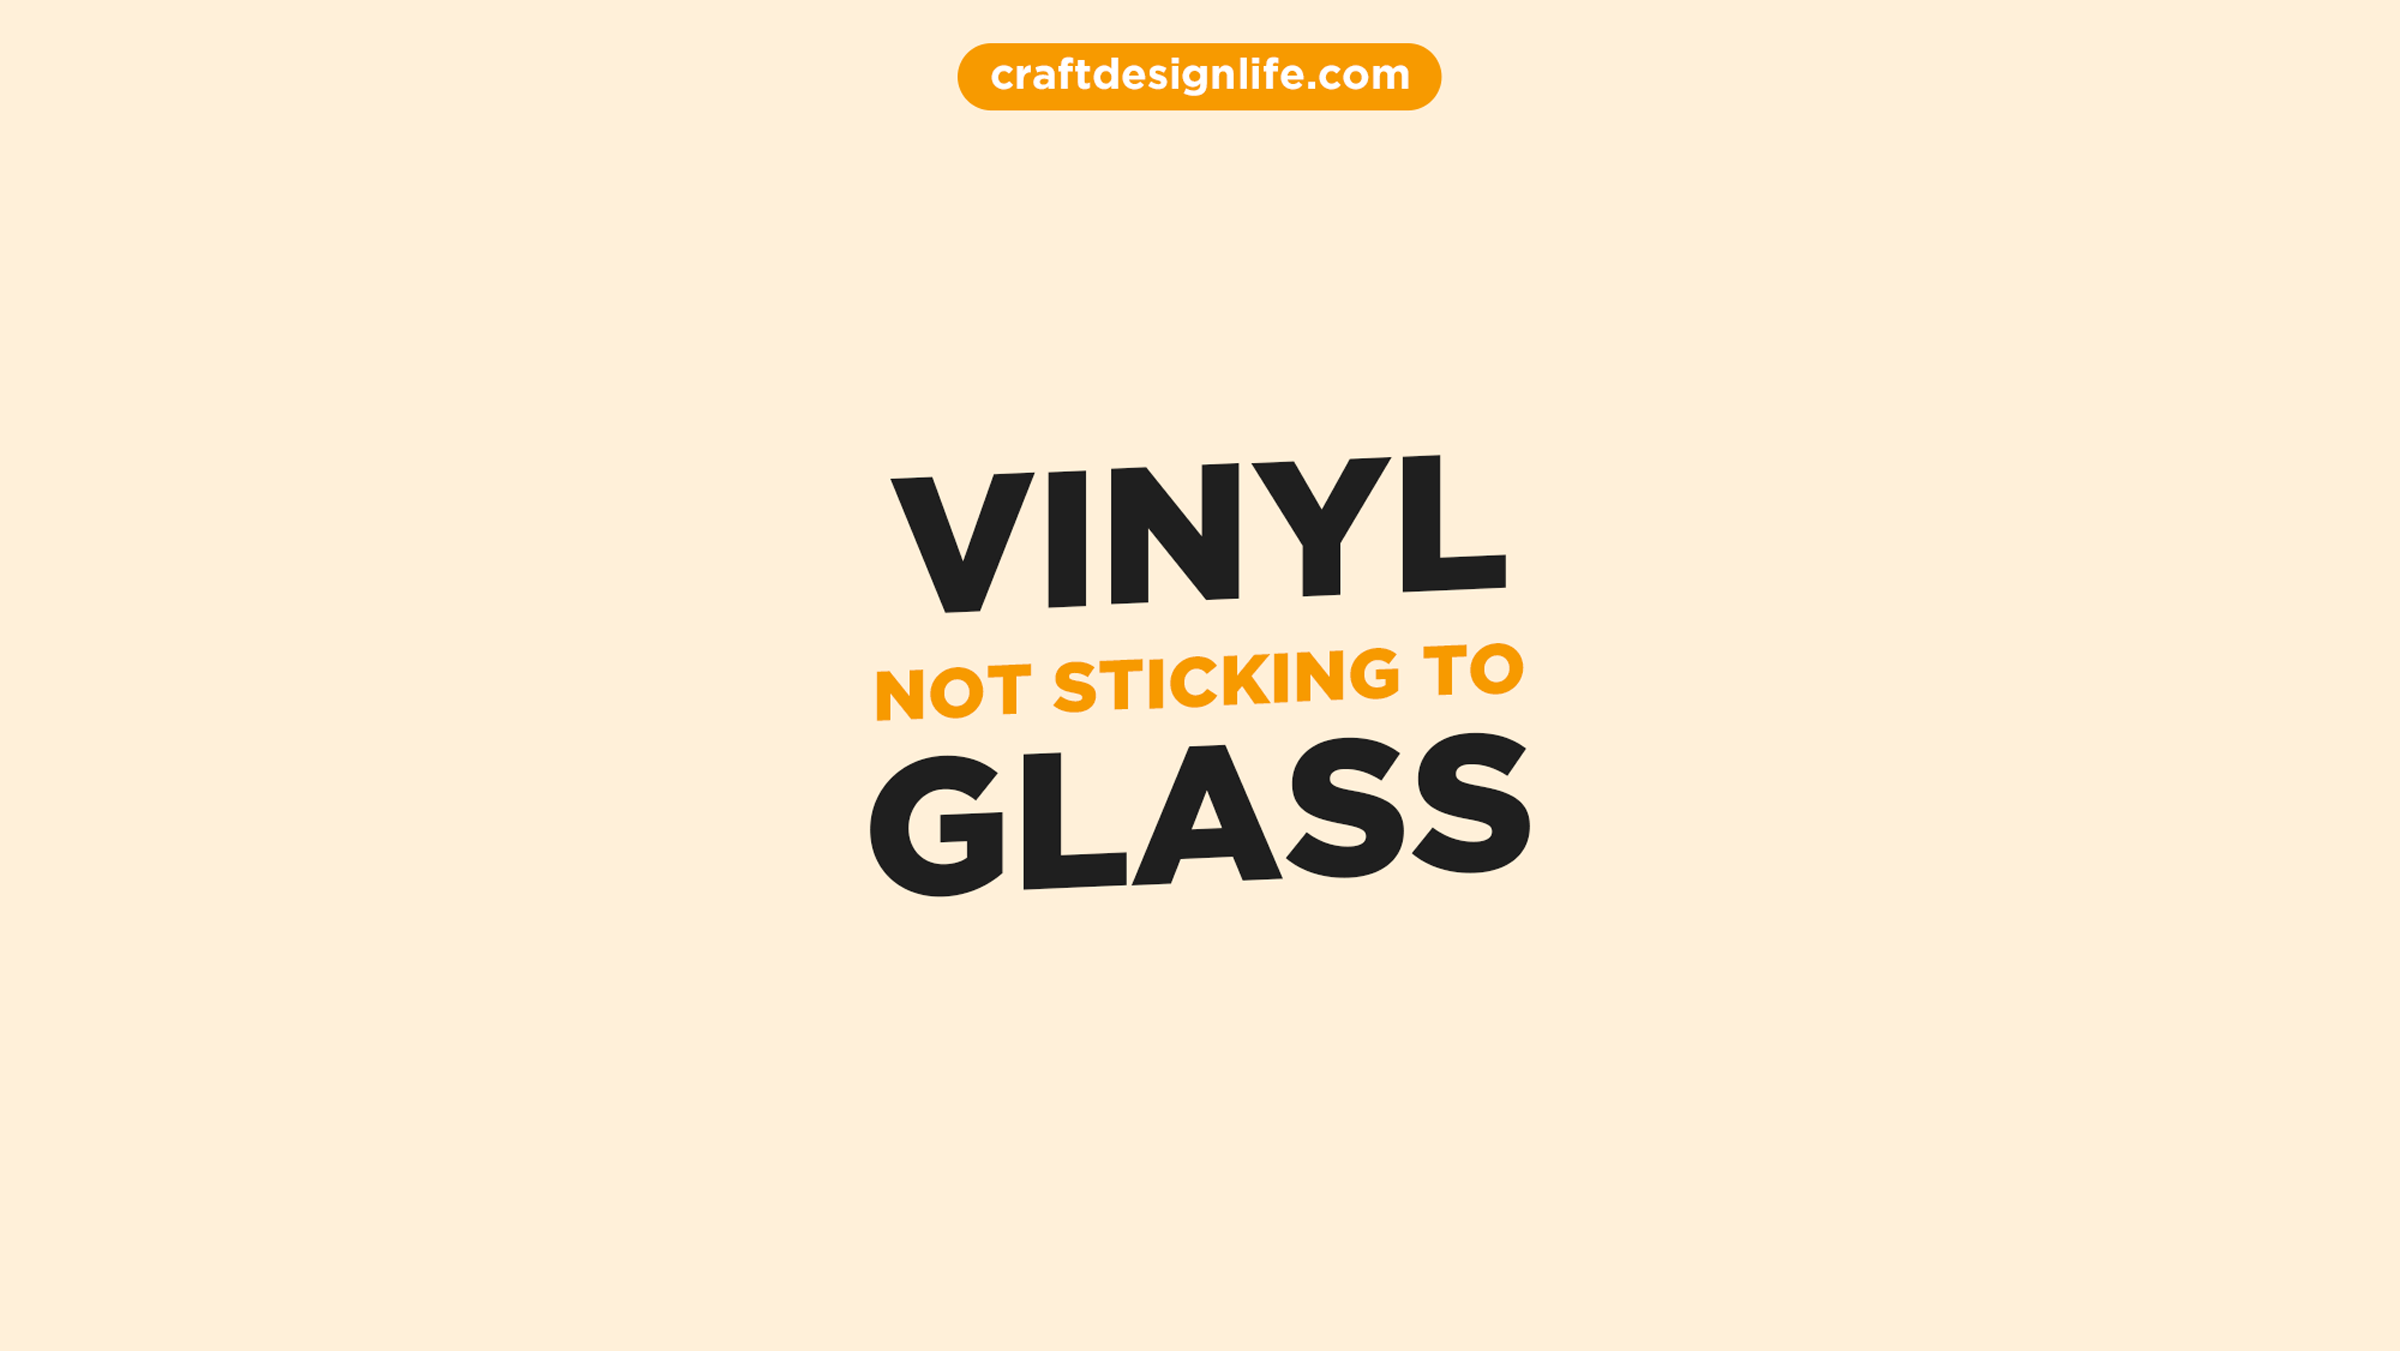 How To Stick Vinyl To Glass (Fix Vinyl Not Sticking to Glass)